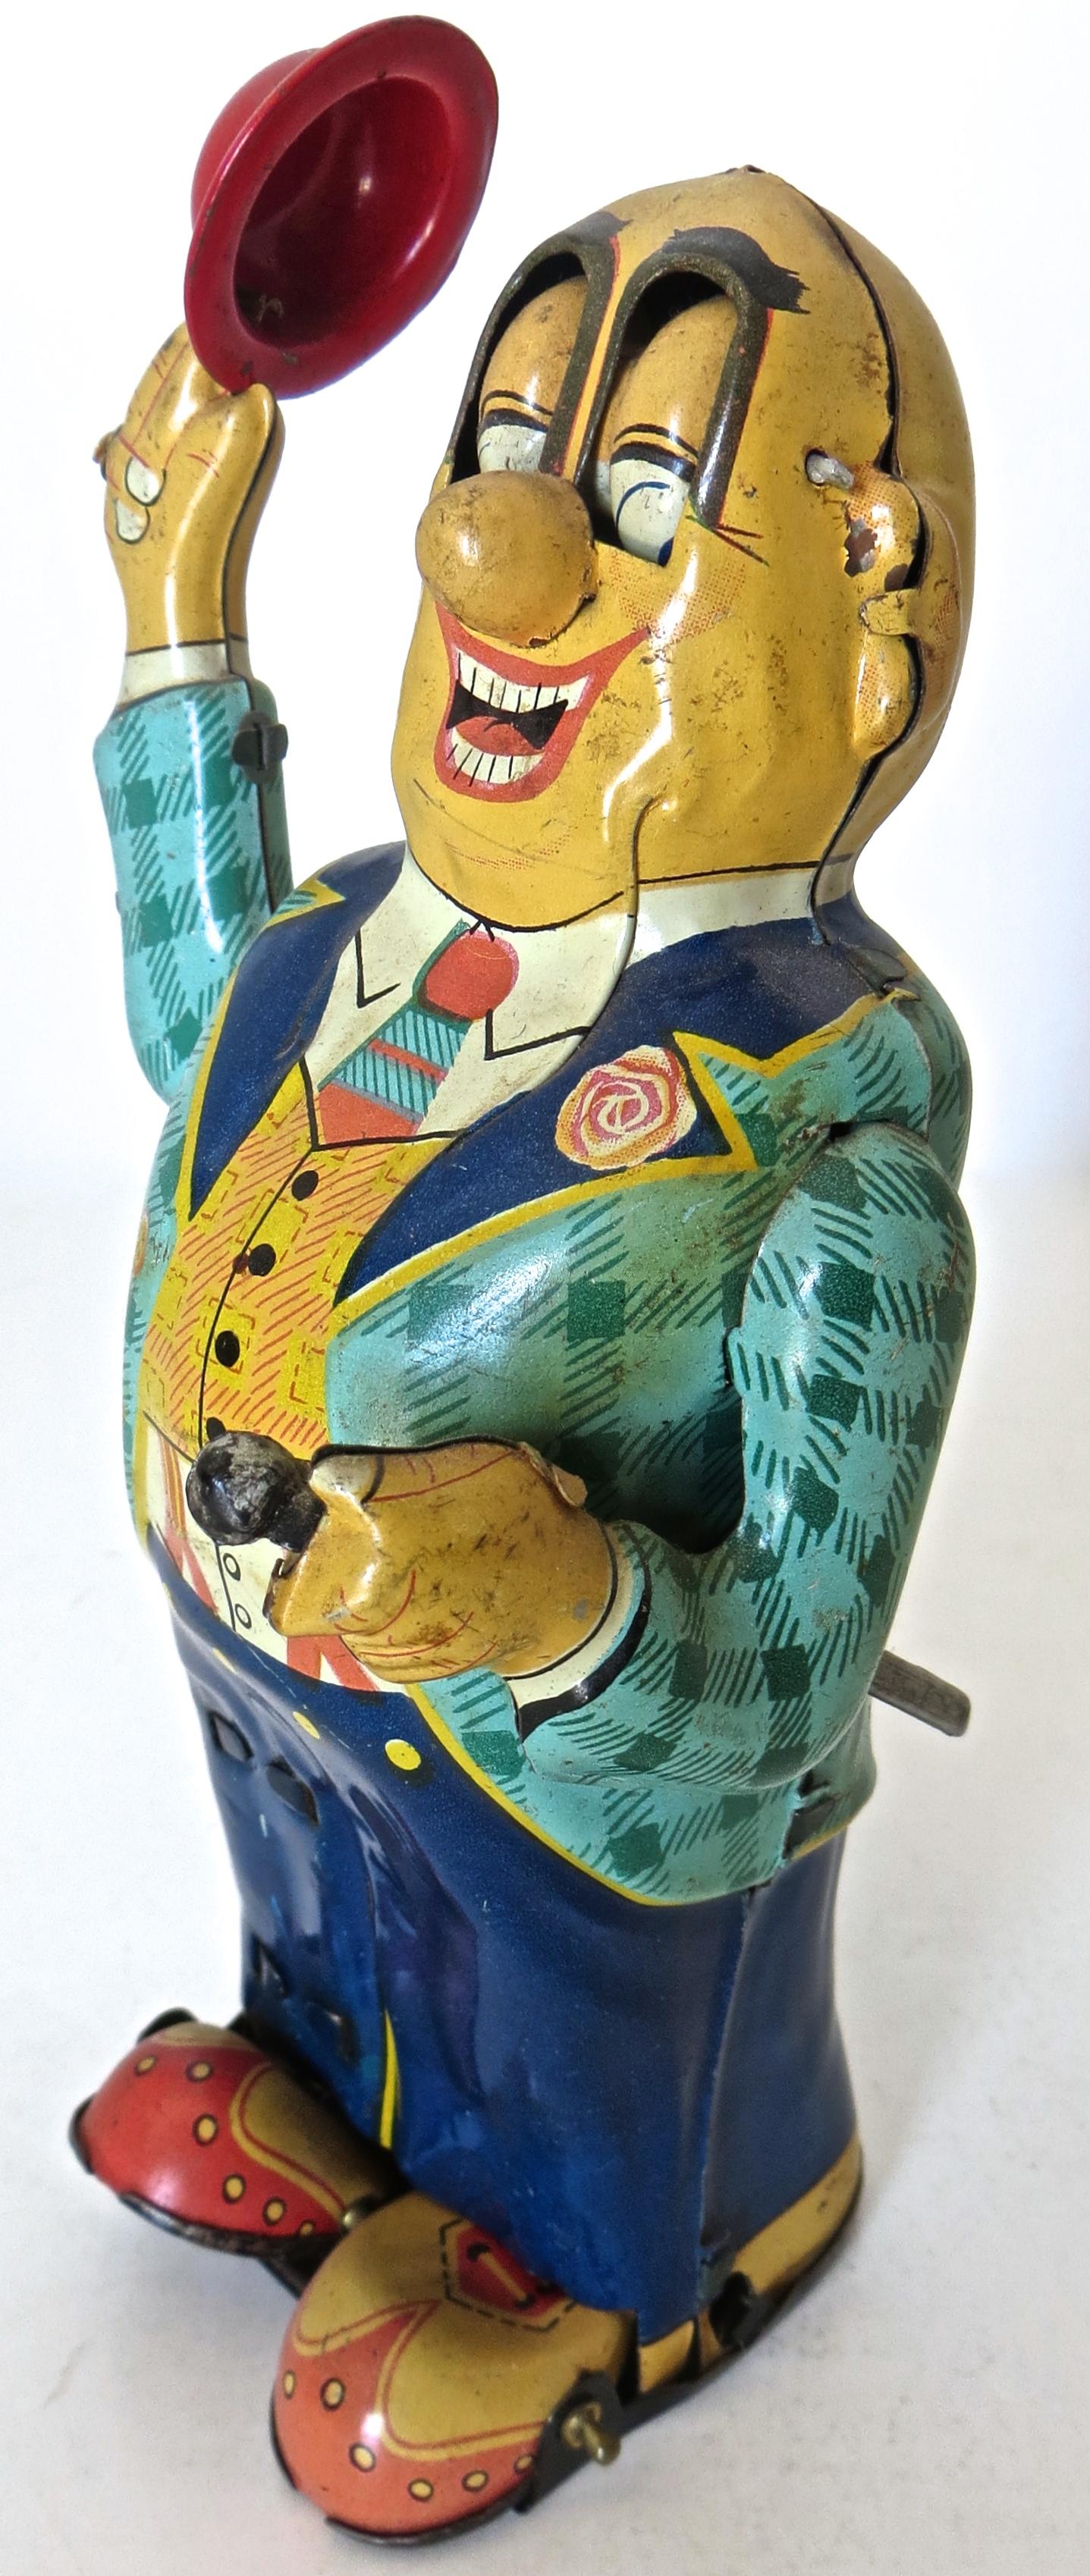 This wonderful, charming and pleasing action wind up toy was manufactured by HTC Mikuni Company of Japan, circa 1950s. It is made completely of tin, and is colorfully lithographed in green, blue, white, and flesh tones, with a tin red hat. The